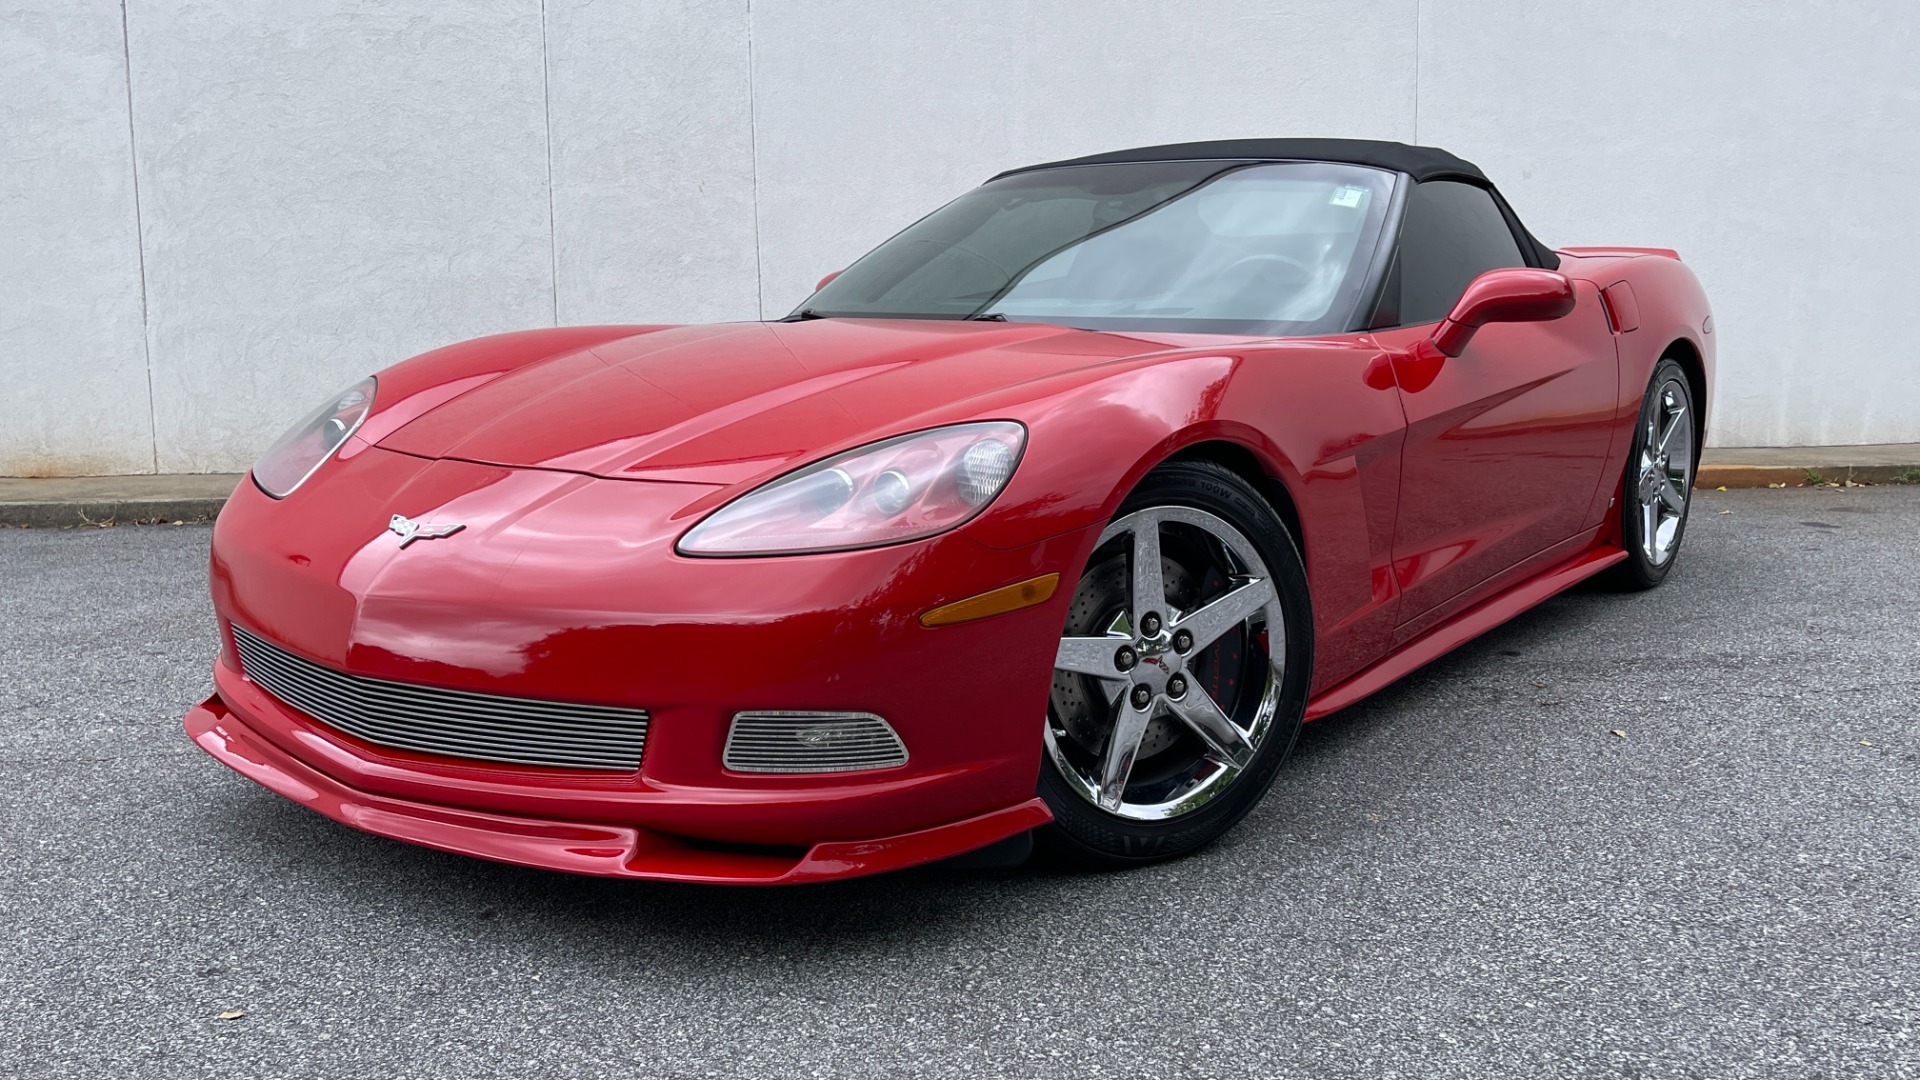 Used 2007 Chevrolet Corvette CONVERTIBLE / CORSA EXHAUST / CHROME WHEELS / LEATHER / AUTOMATIC for sale Sold at Formula Imports in Charlotte NC 28227 44